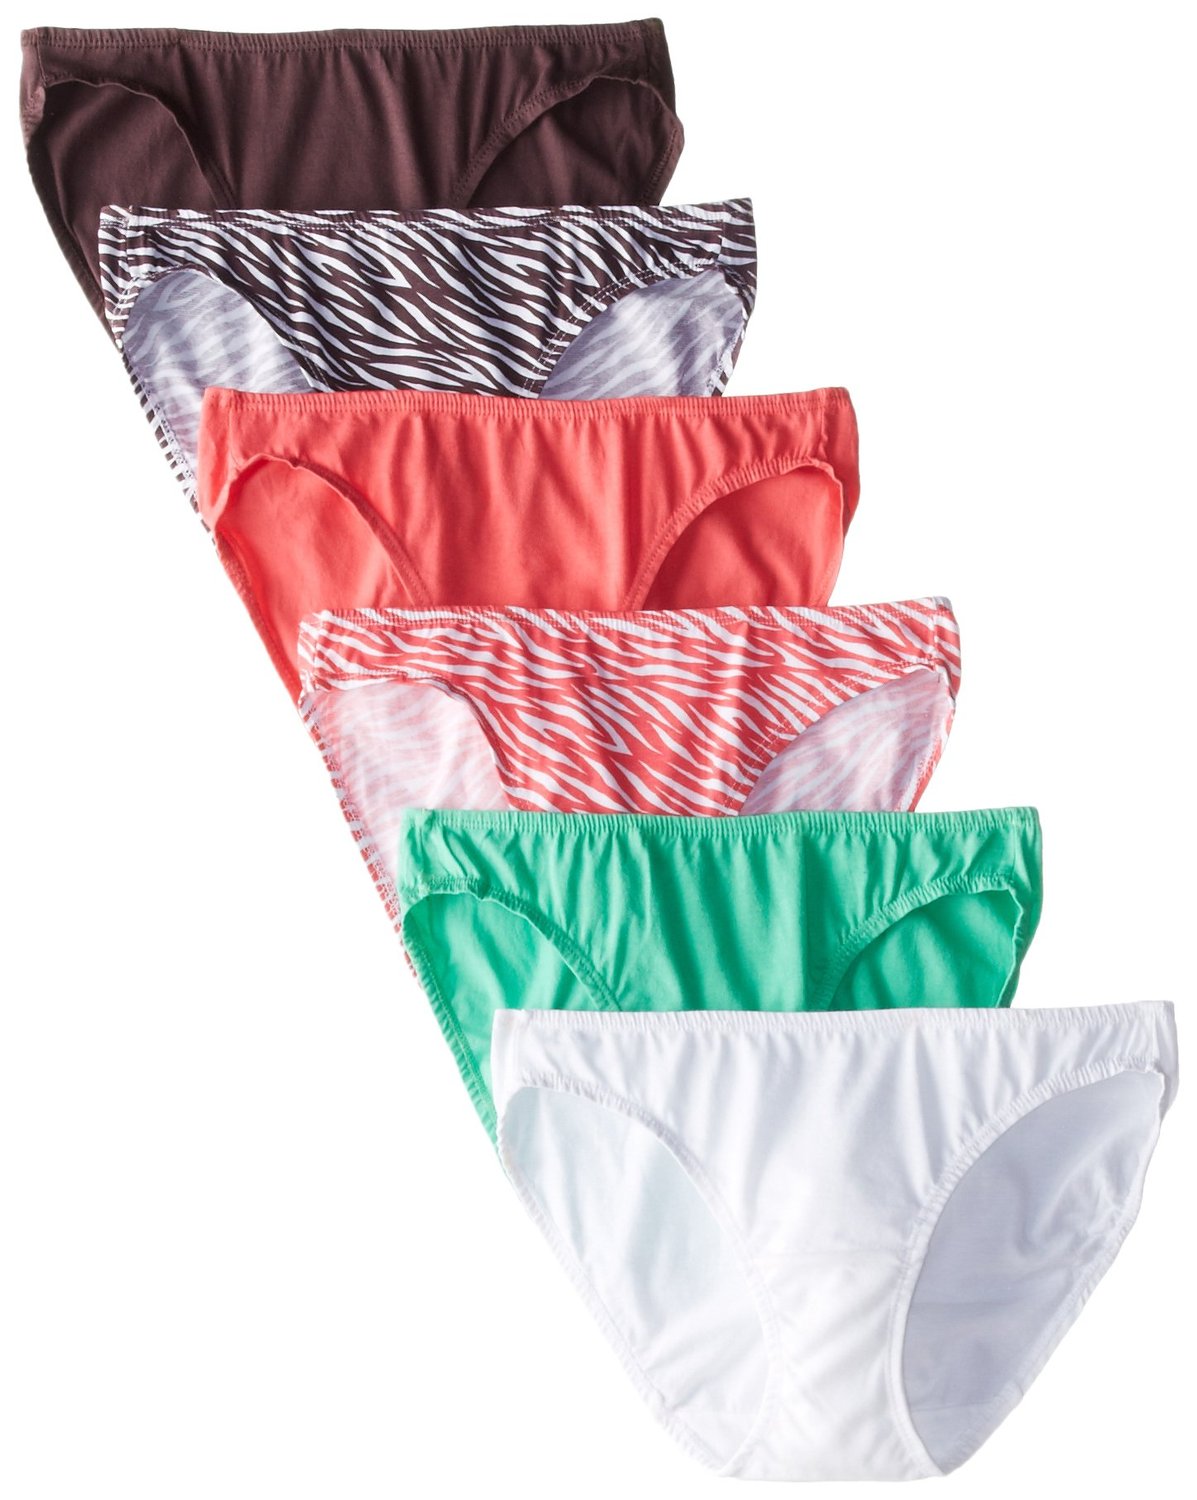  Fruit Of The Loom Womens Tag Free Cotton Panties